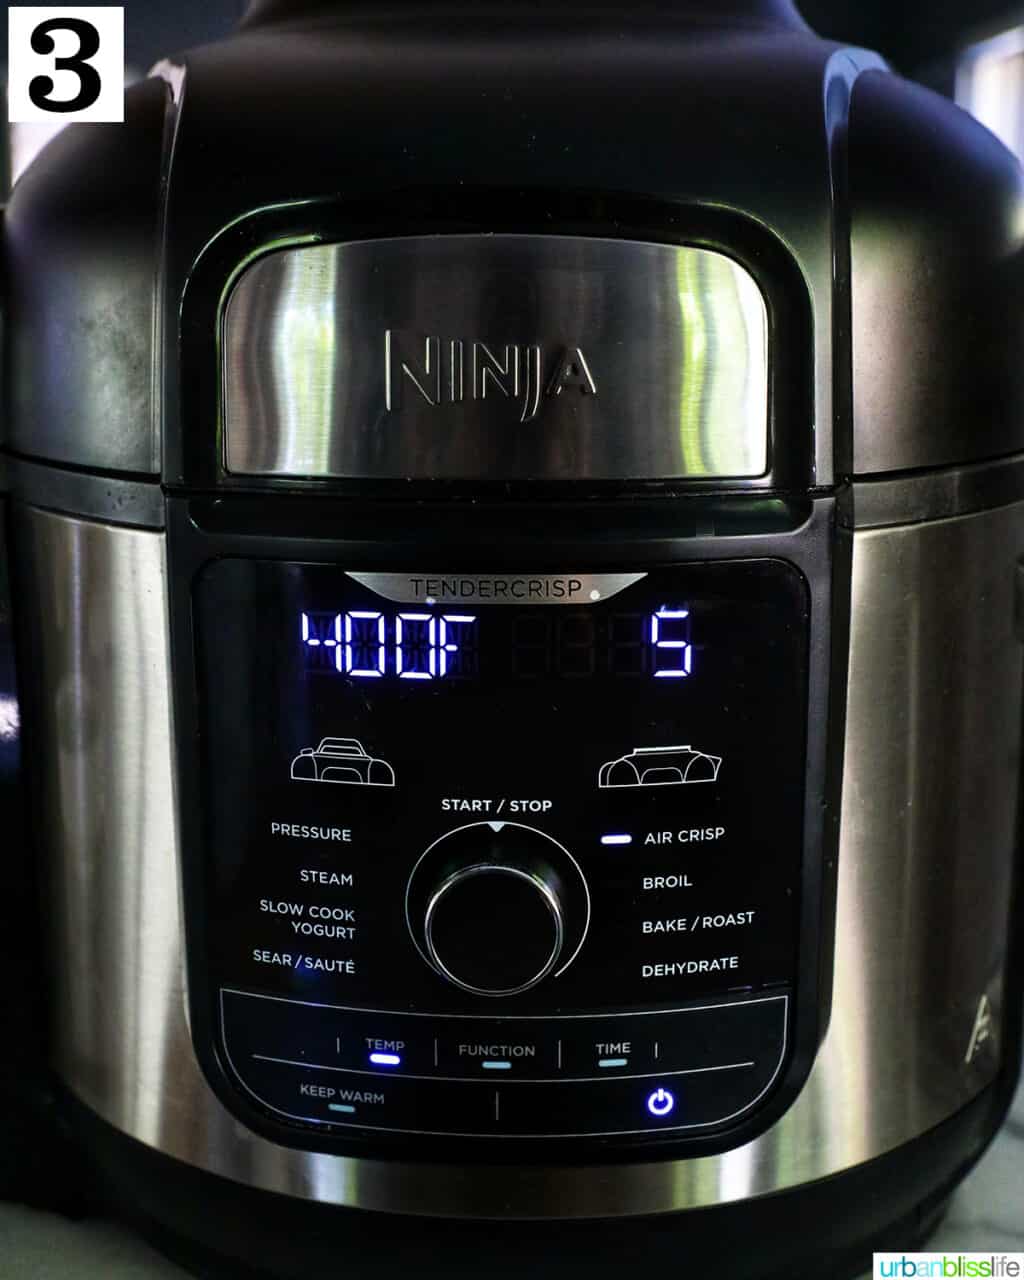 ninja foodi deluxe xl pressure cooker multicooker set to air fry at 400°F for 5 minutes.